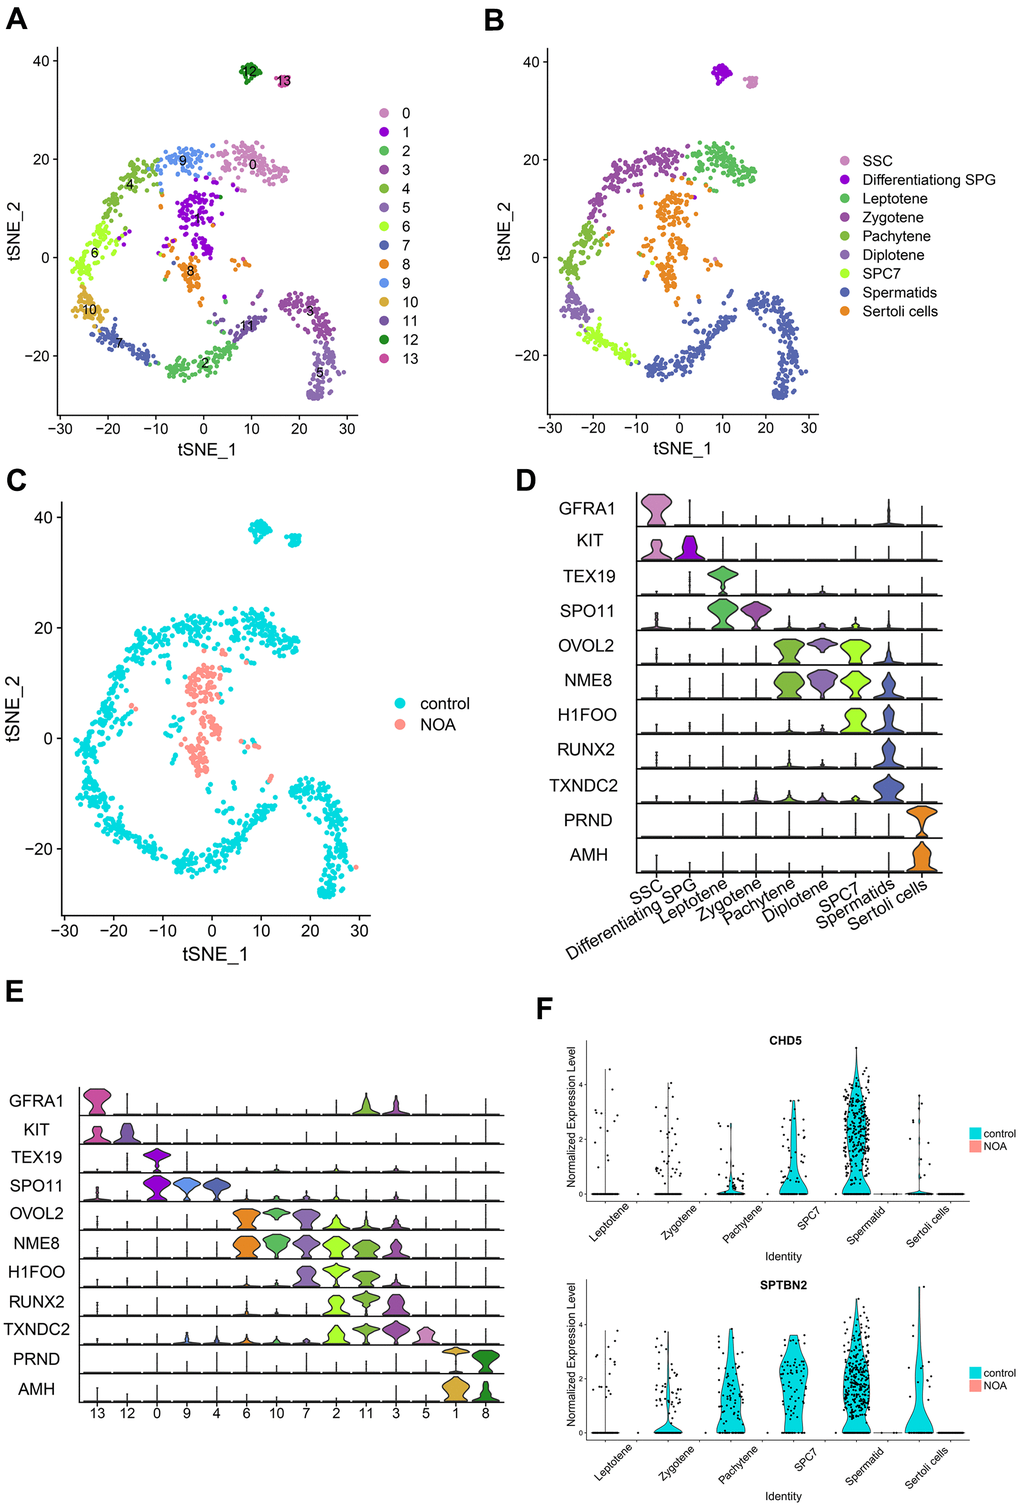 Identification and comparison of different cell types in different samples based on the single-cell RNA-seq dataset. (A) Cell cluster distribution in the TSNE plot. (B) Different types of cells and different samples identified in tSNE plots. SSC, spermatogonial stem cells; Differentiating SPG, differentiating spermatogonia; SPC7, cell mixtures including diakinesis, metaphase, anaphase, telophase, and secondary spermatocytes. (C) Comparison of different samples in tSNE plots. (D) Multiviolin plot of expressions of specific gene markers in identified cell types. X-axis represents diverse cell types. Y-axis represents the expression of specific gene markers. (E) Multiviolin plot of expressions of specific gene markers in different clusters. X-axis represents different clusters. Y-axis represents the expressions of specific gene markers. (F) The expression validation of hub genes from diverse cell types in the NOA group compared with the control group. The Y-axis expressions were normalized by log2(TPM/10+1).